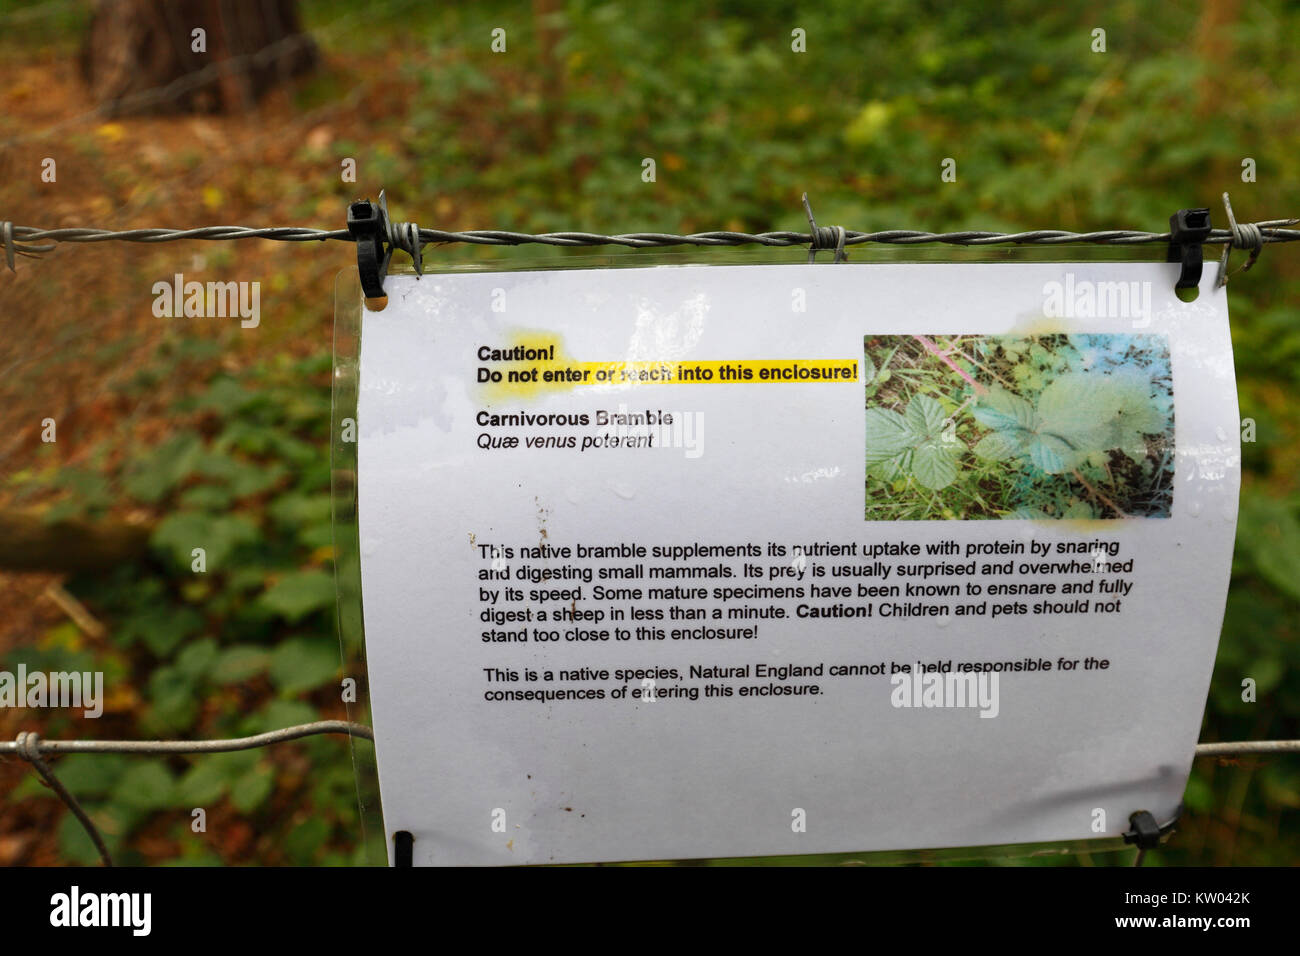 Spoof sign warning of a carnivorous bramble. Stock Photo